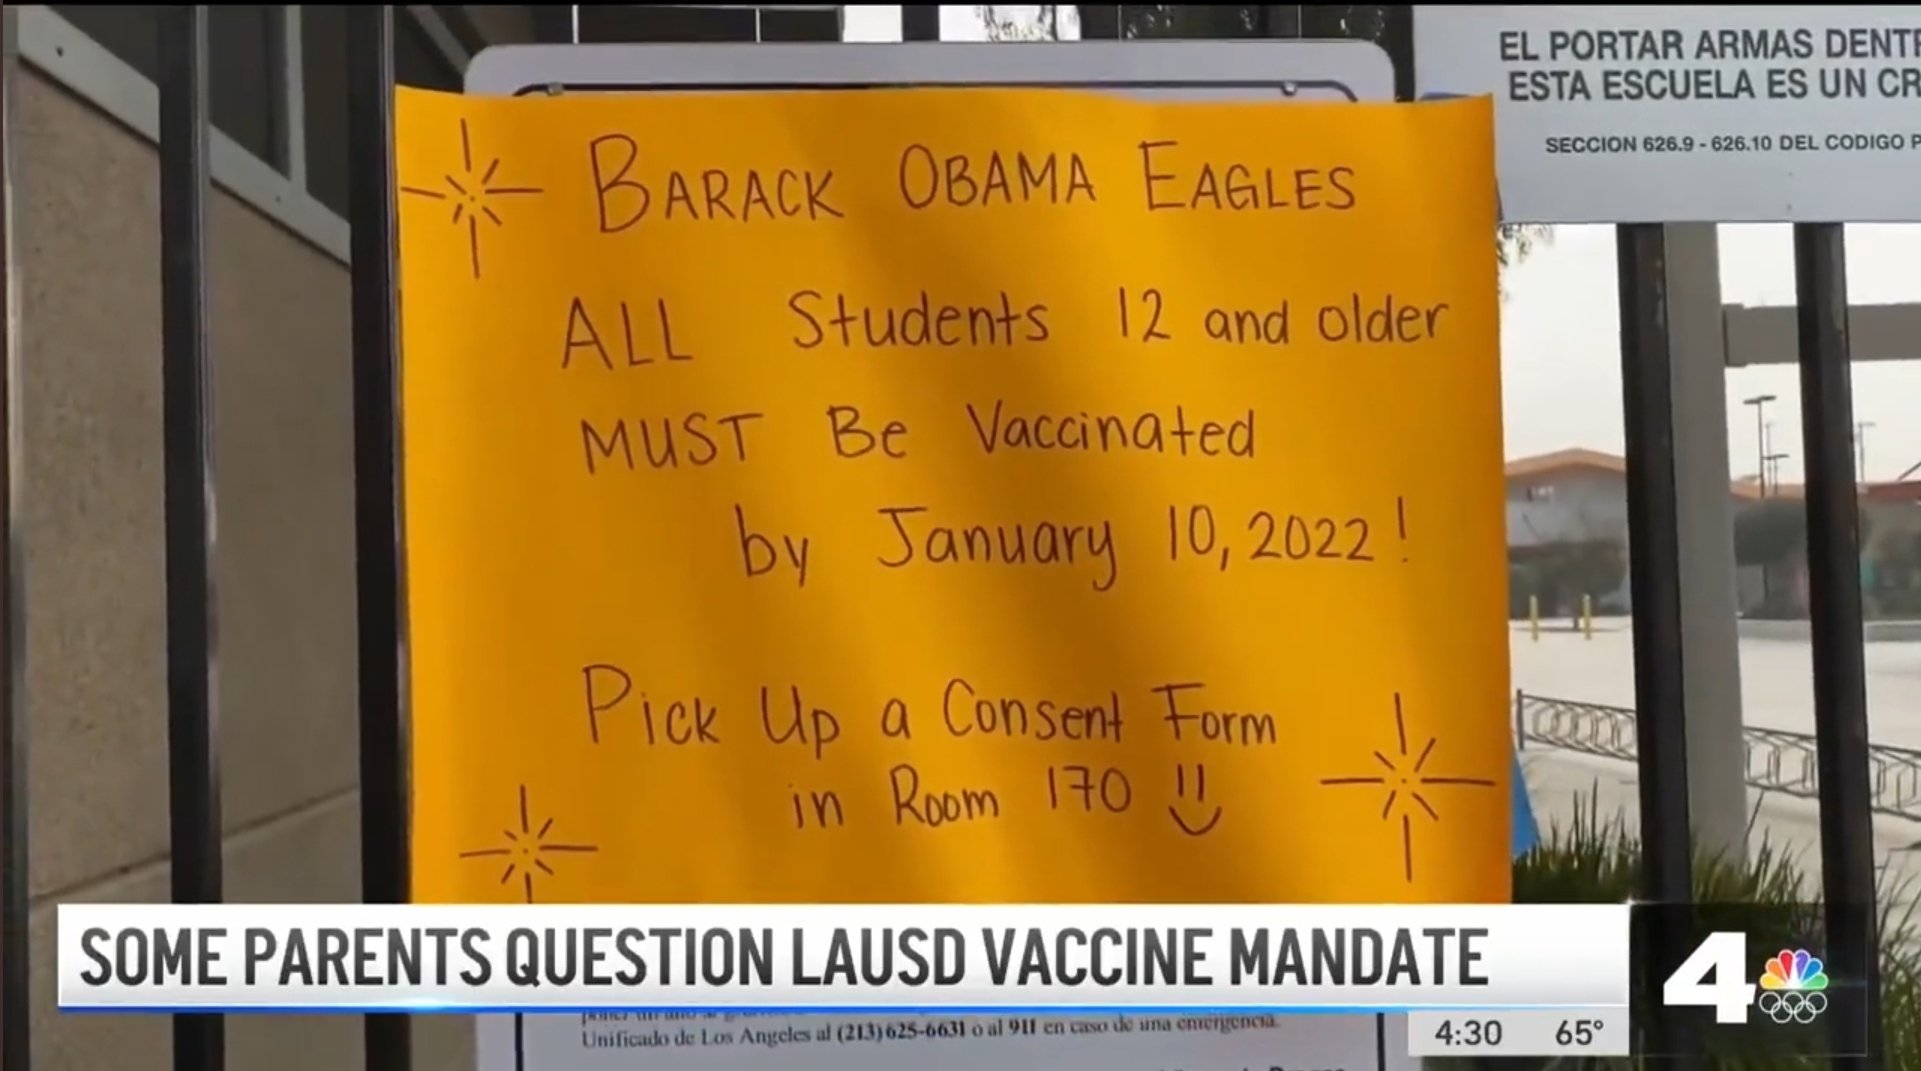 WATCH: Outraged Mother Says 13-Year-Old Son Was Vaccinated Without Her Consent At Obama Global Prep Academy In LA After School Bribed Him With Pizza